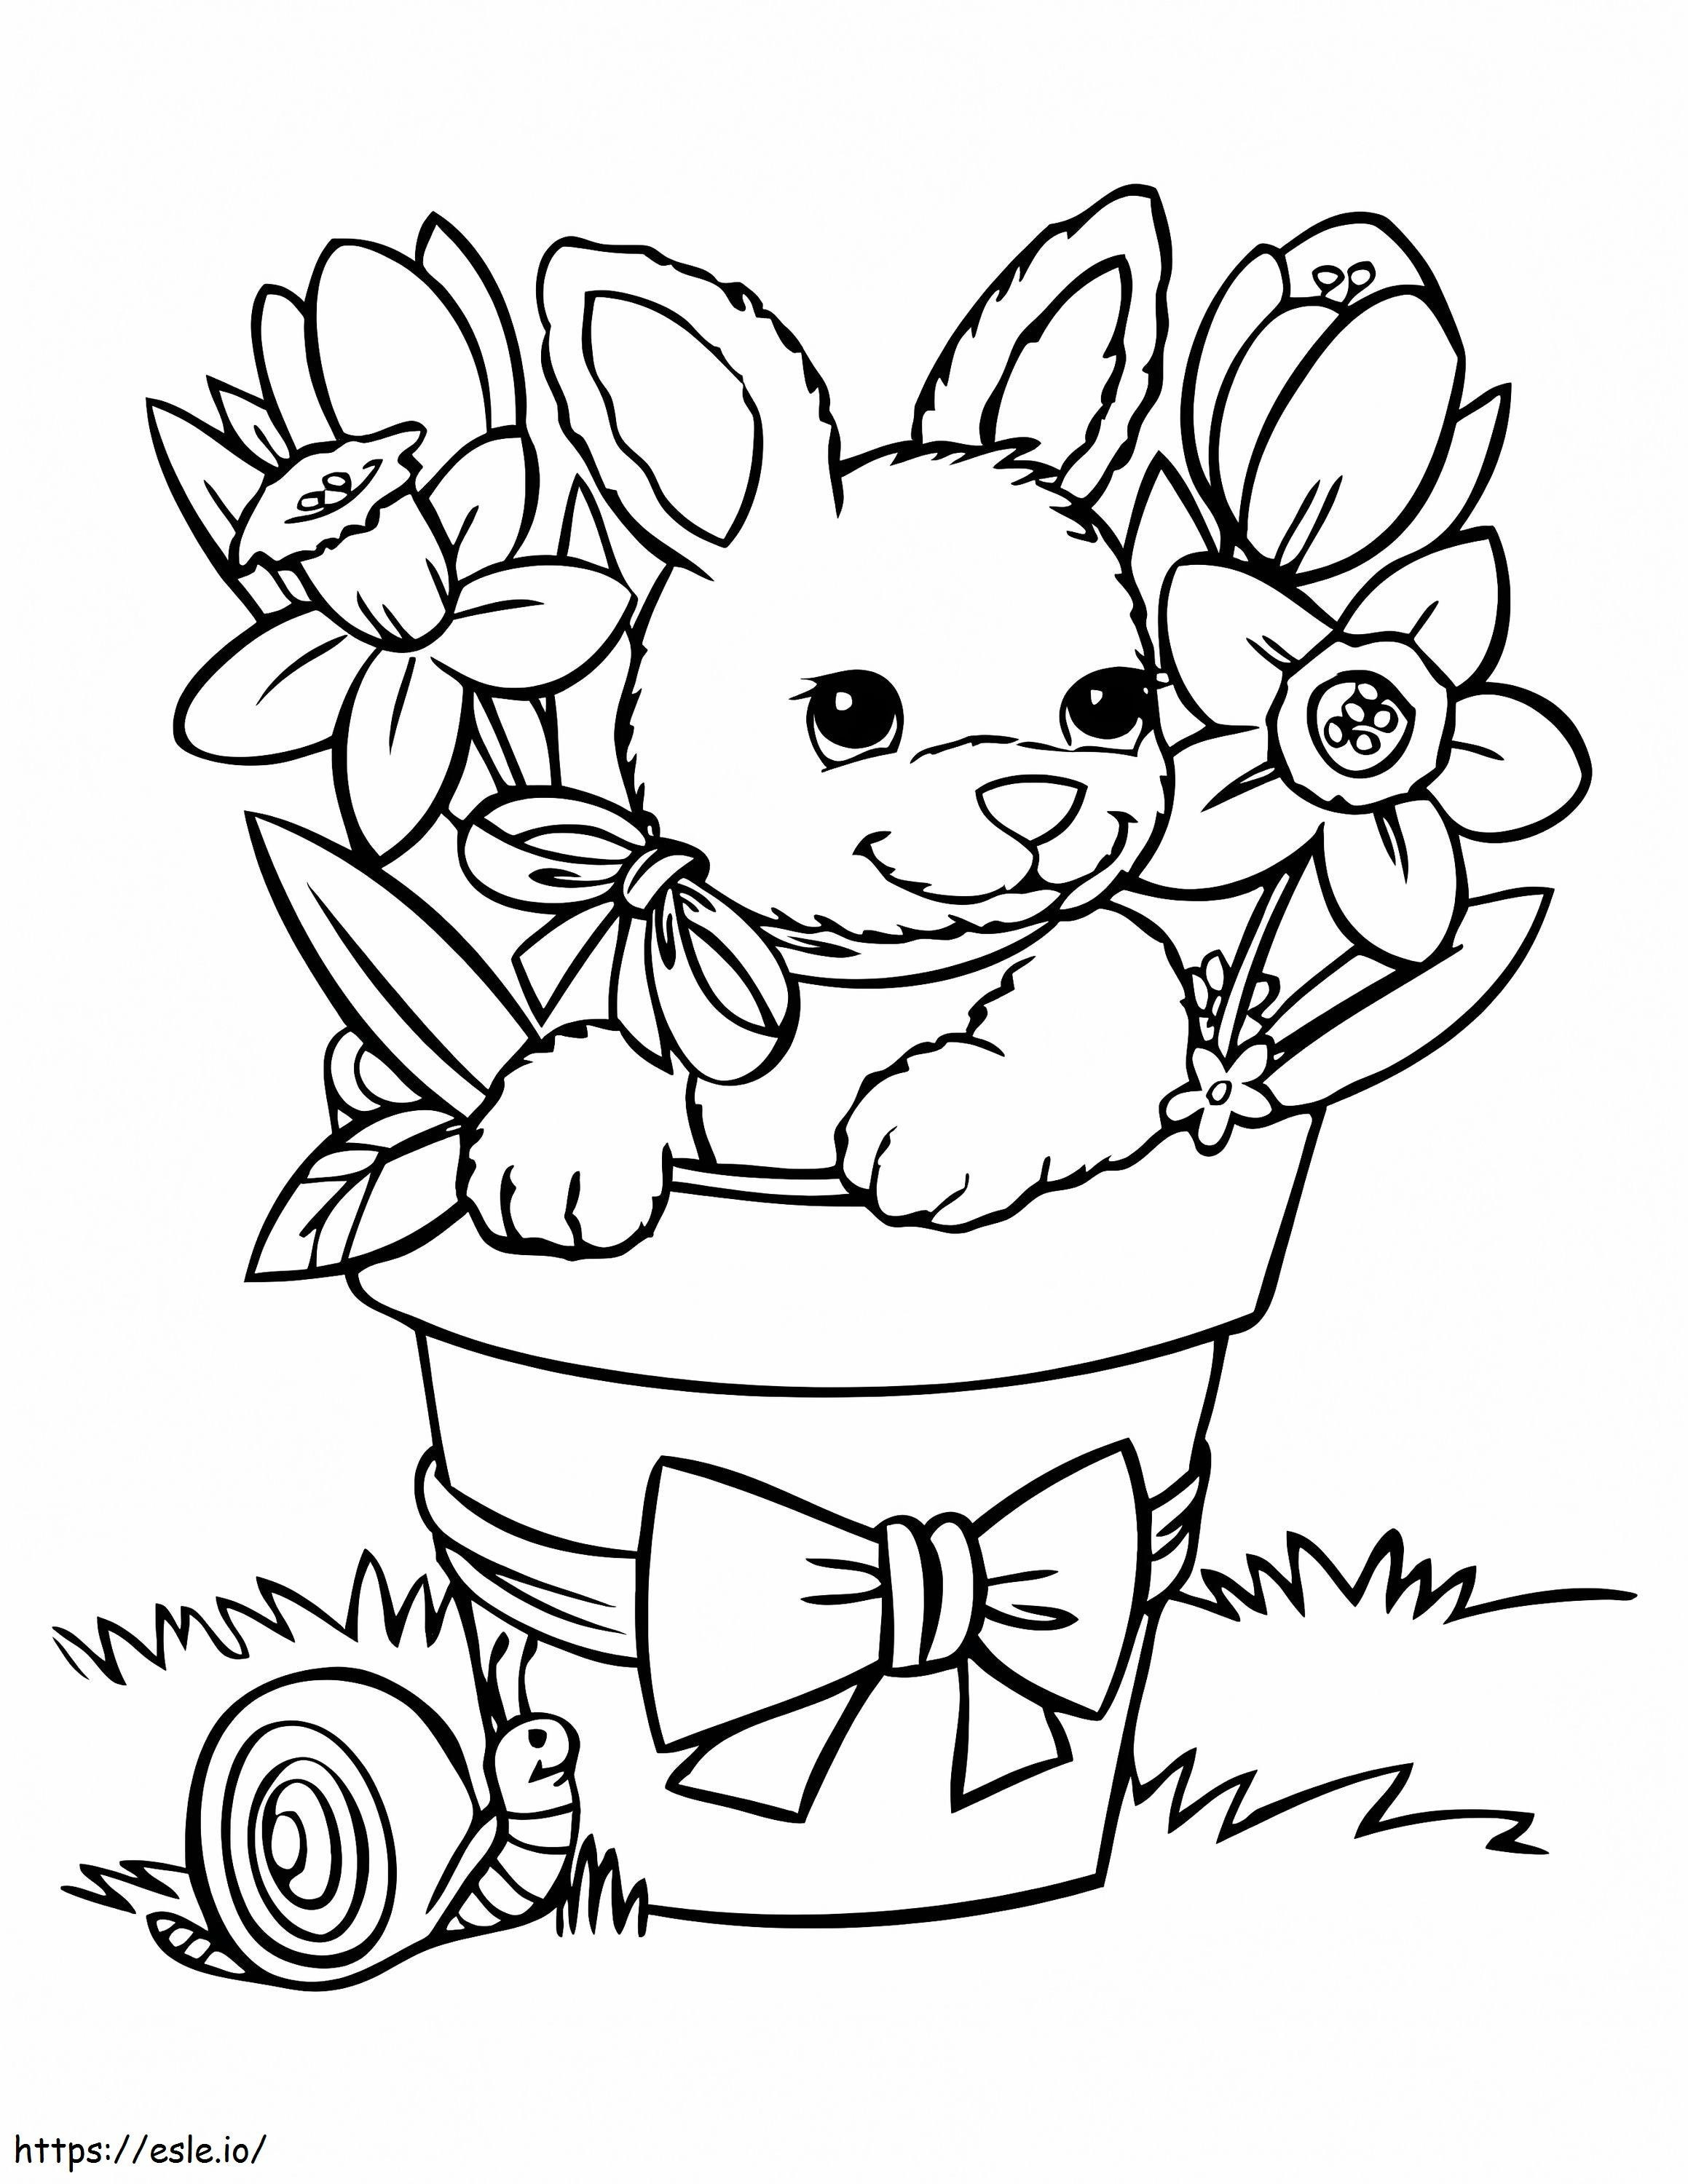 Rabbit In Flower Vase coloring page